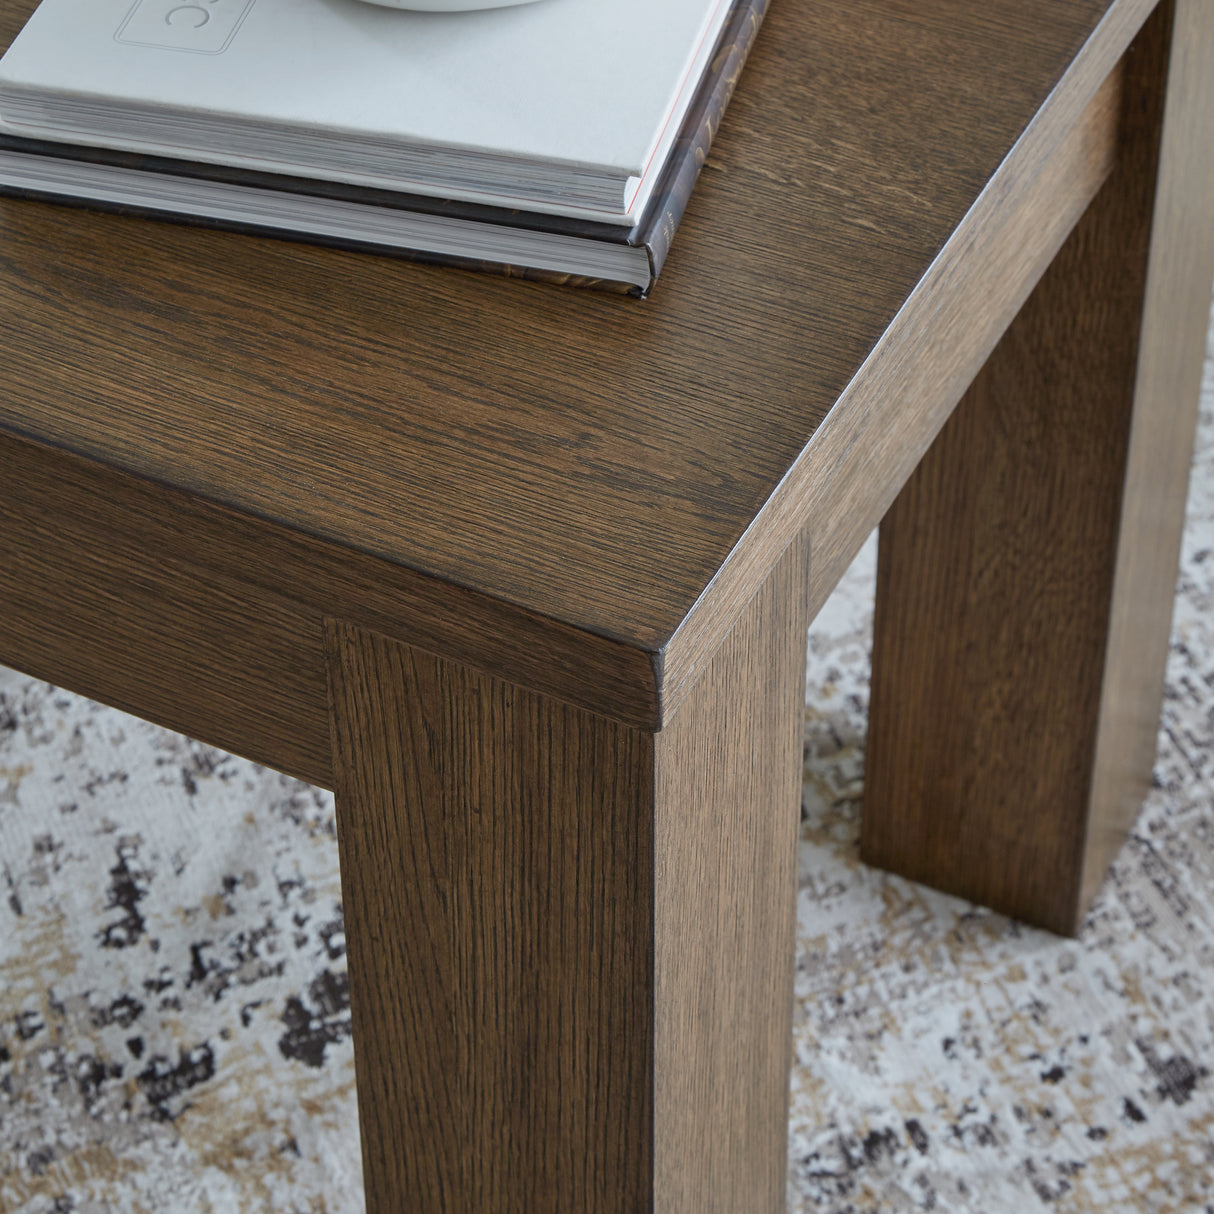 Rosswain Warm Brown End Table - T763-2 - Luna Furniture